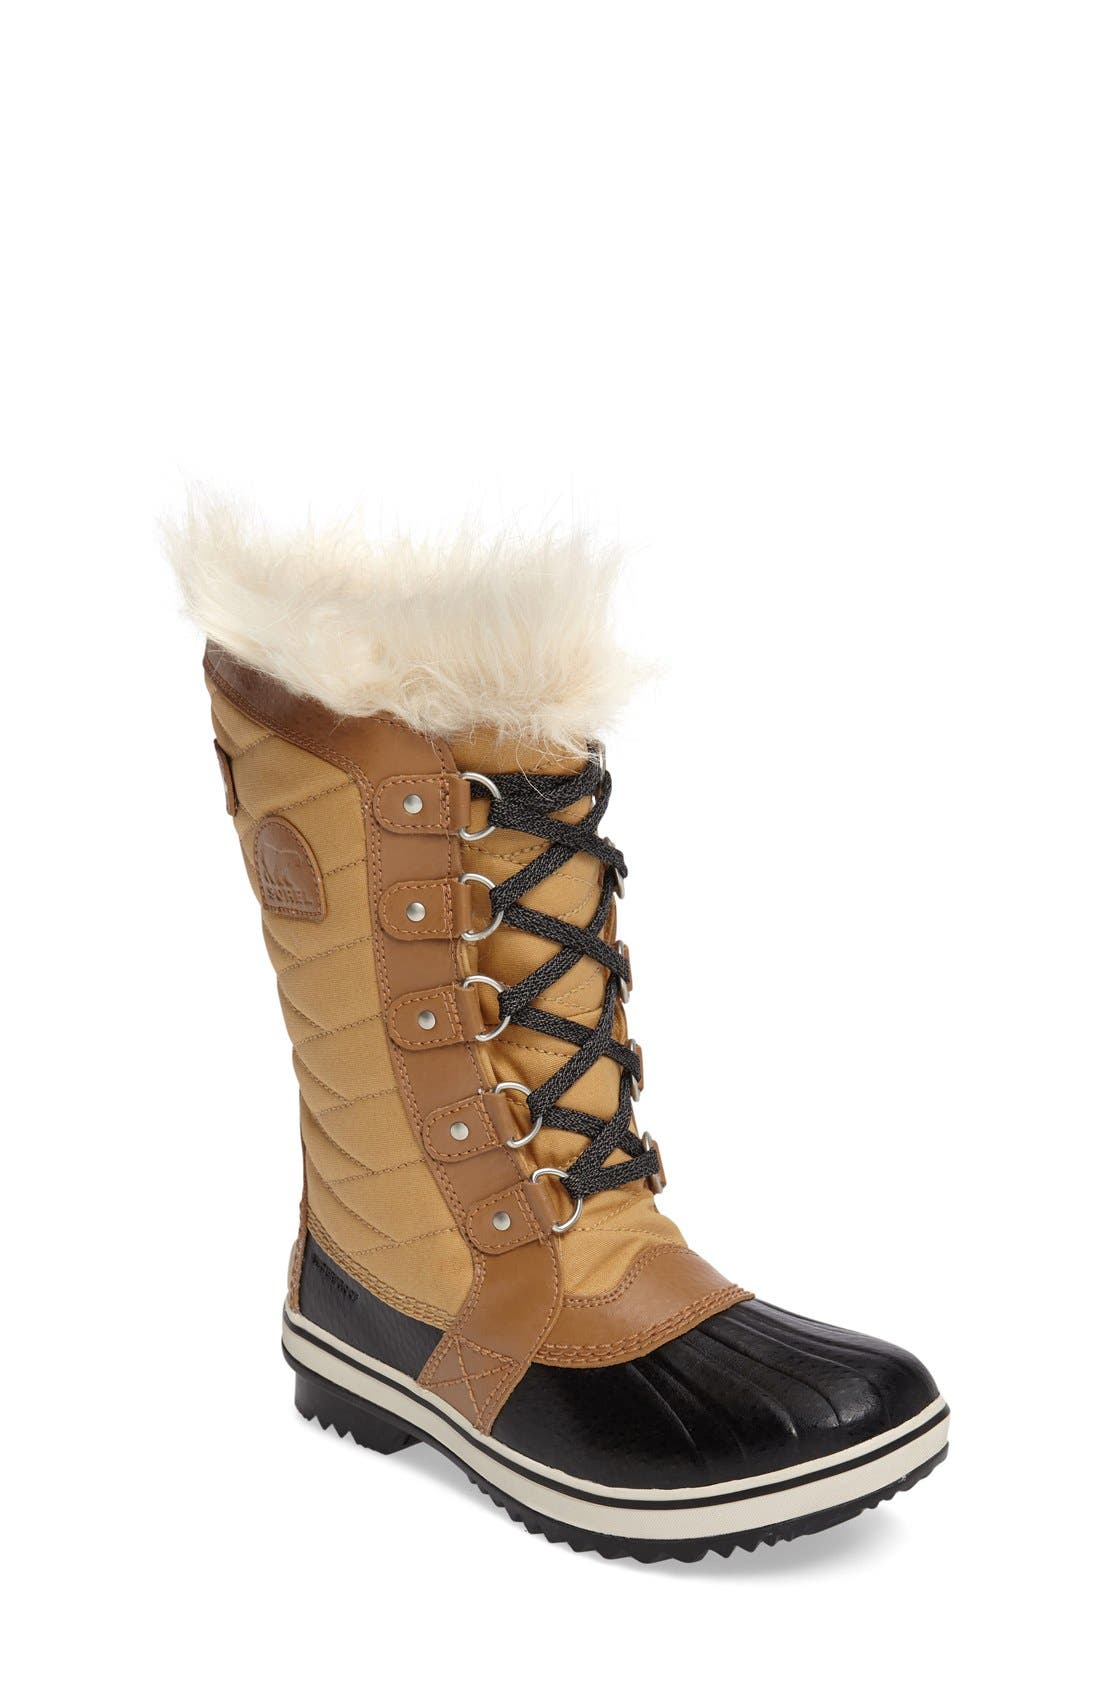 All Kids' SOREL Boots and Booties 